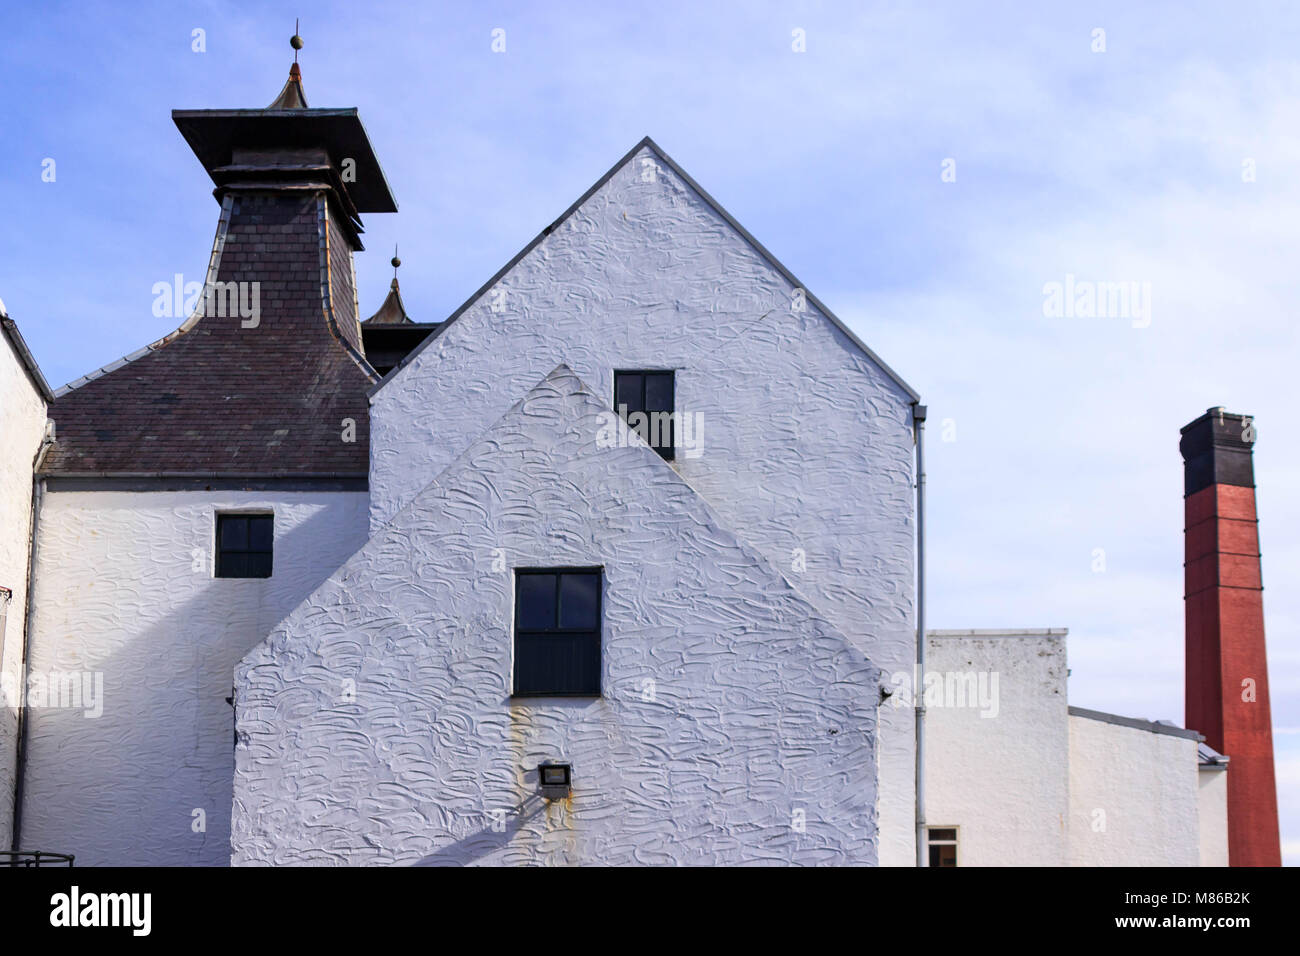 White brick buildings with cupola rooftop and a red smoke stack at a Scotch Distillery on the island of Islay, Scotland, UK Stock Photo